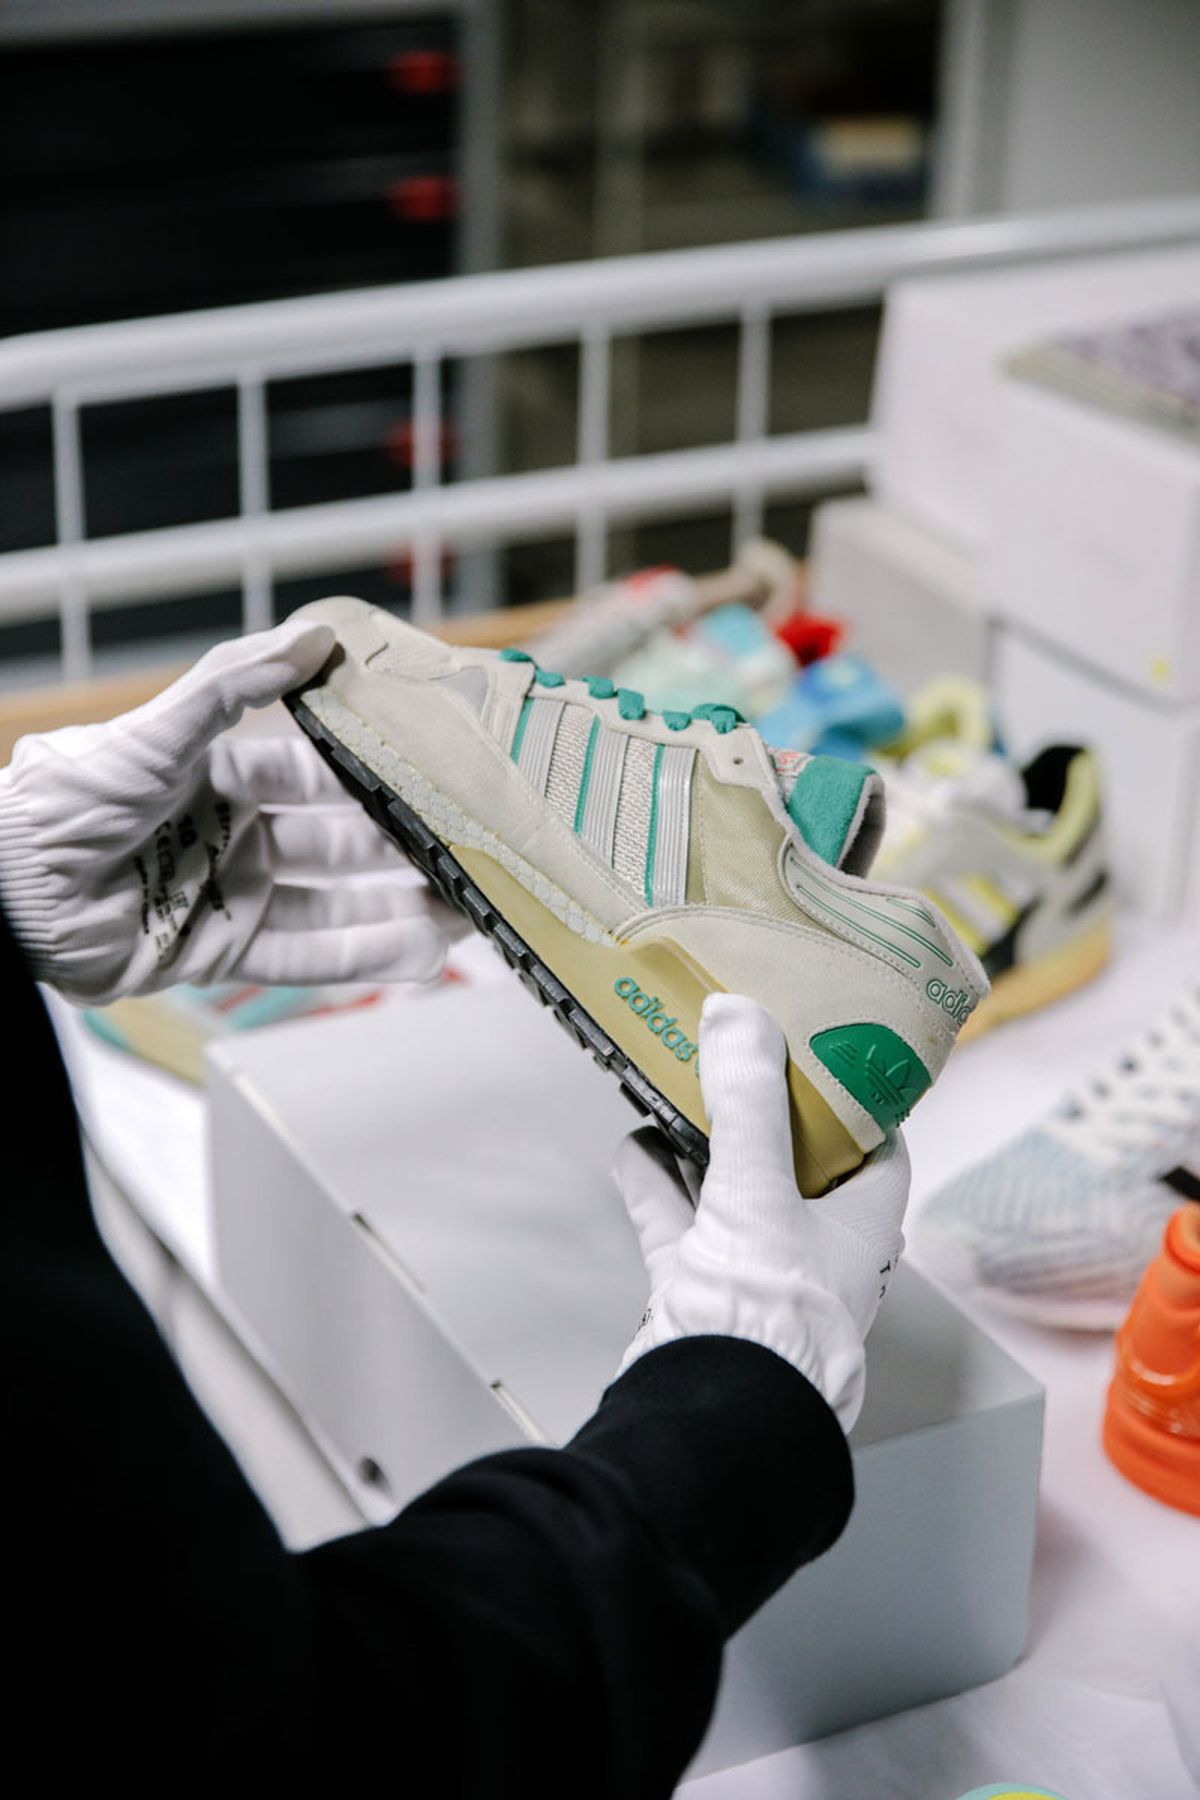 A Brief History of the adidas ZX: Innovation, Collabs & Raves